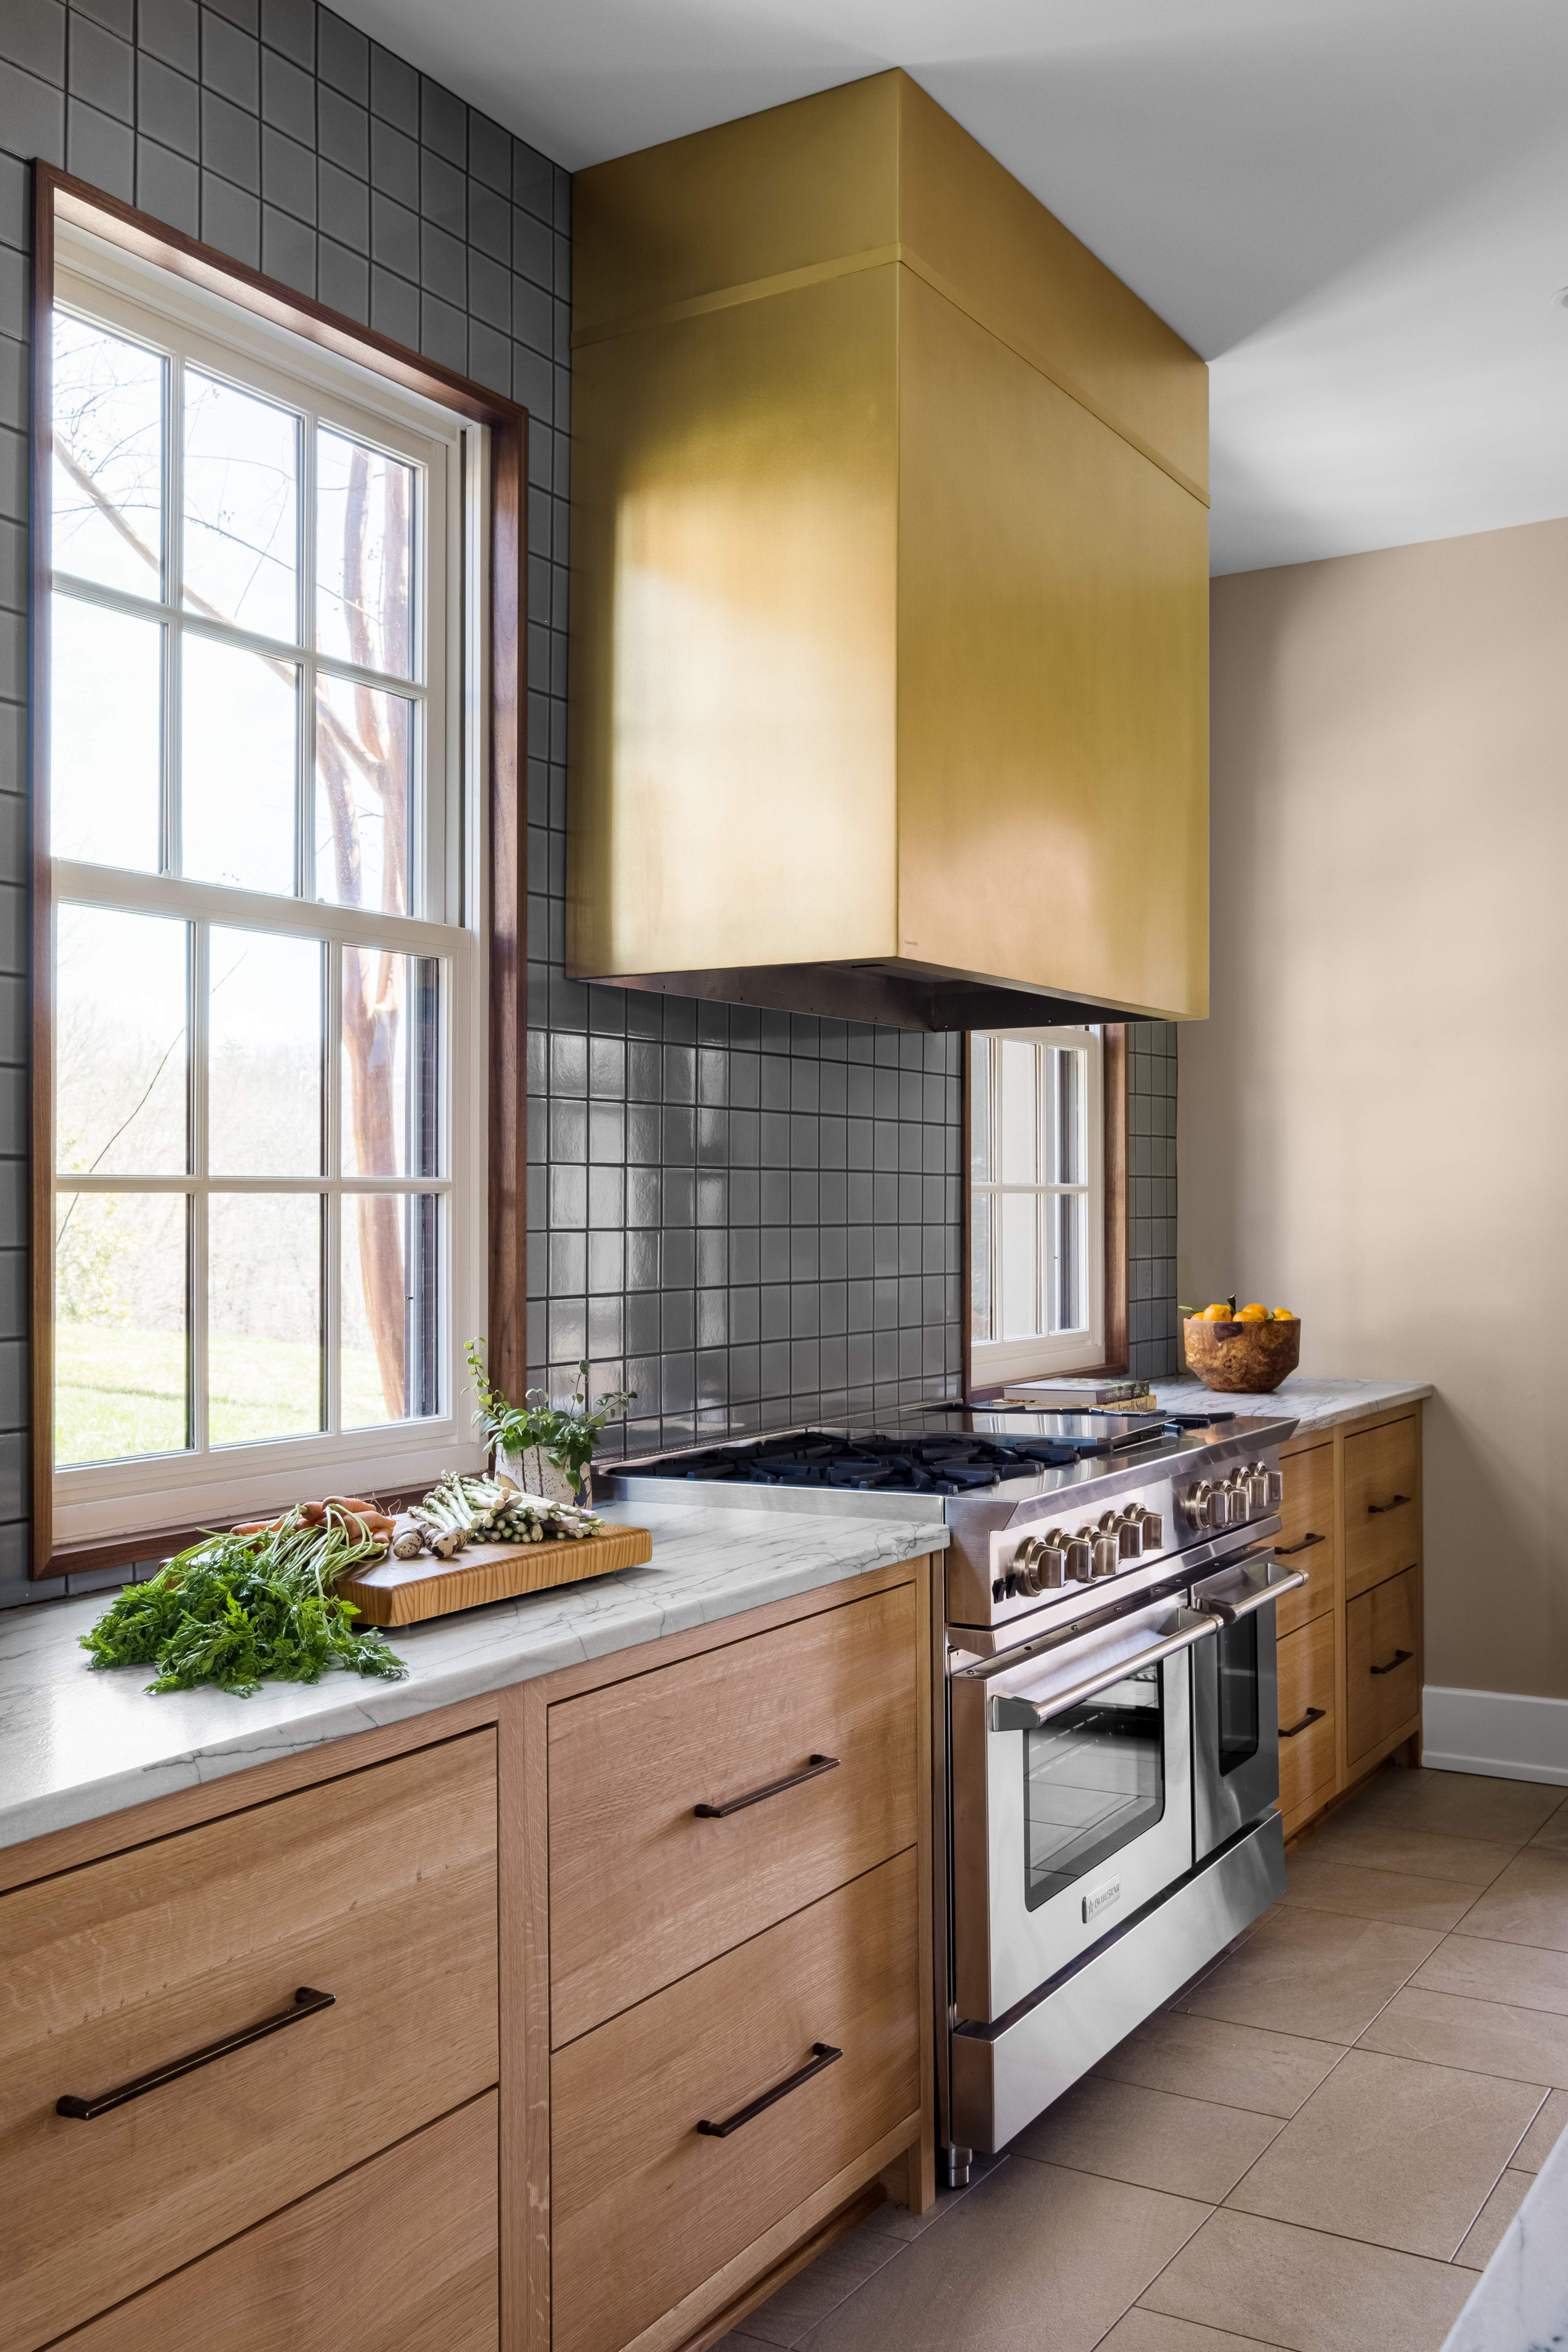 Featuring a range hood, kitchen design idea french-inspired elements, elegant brown kitchen cabinets, luxurious marble kitchen countertops, and marble backsplash